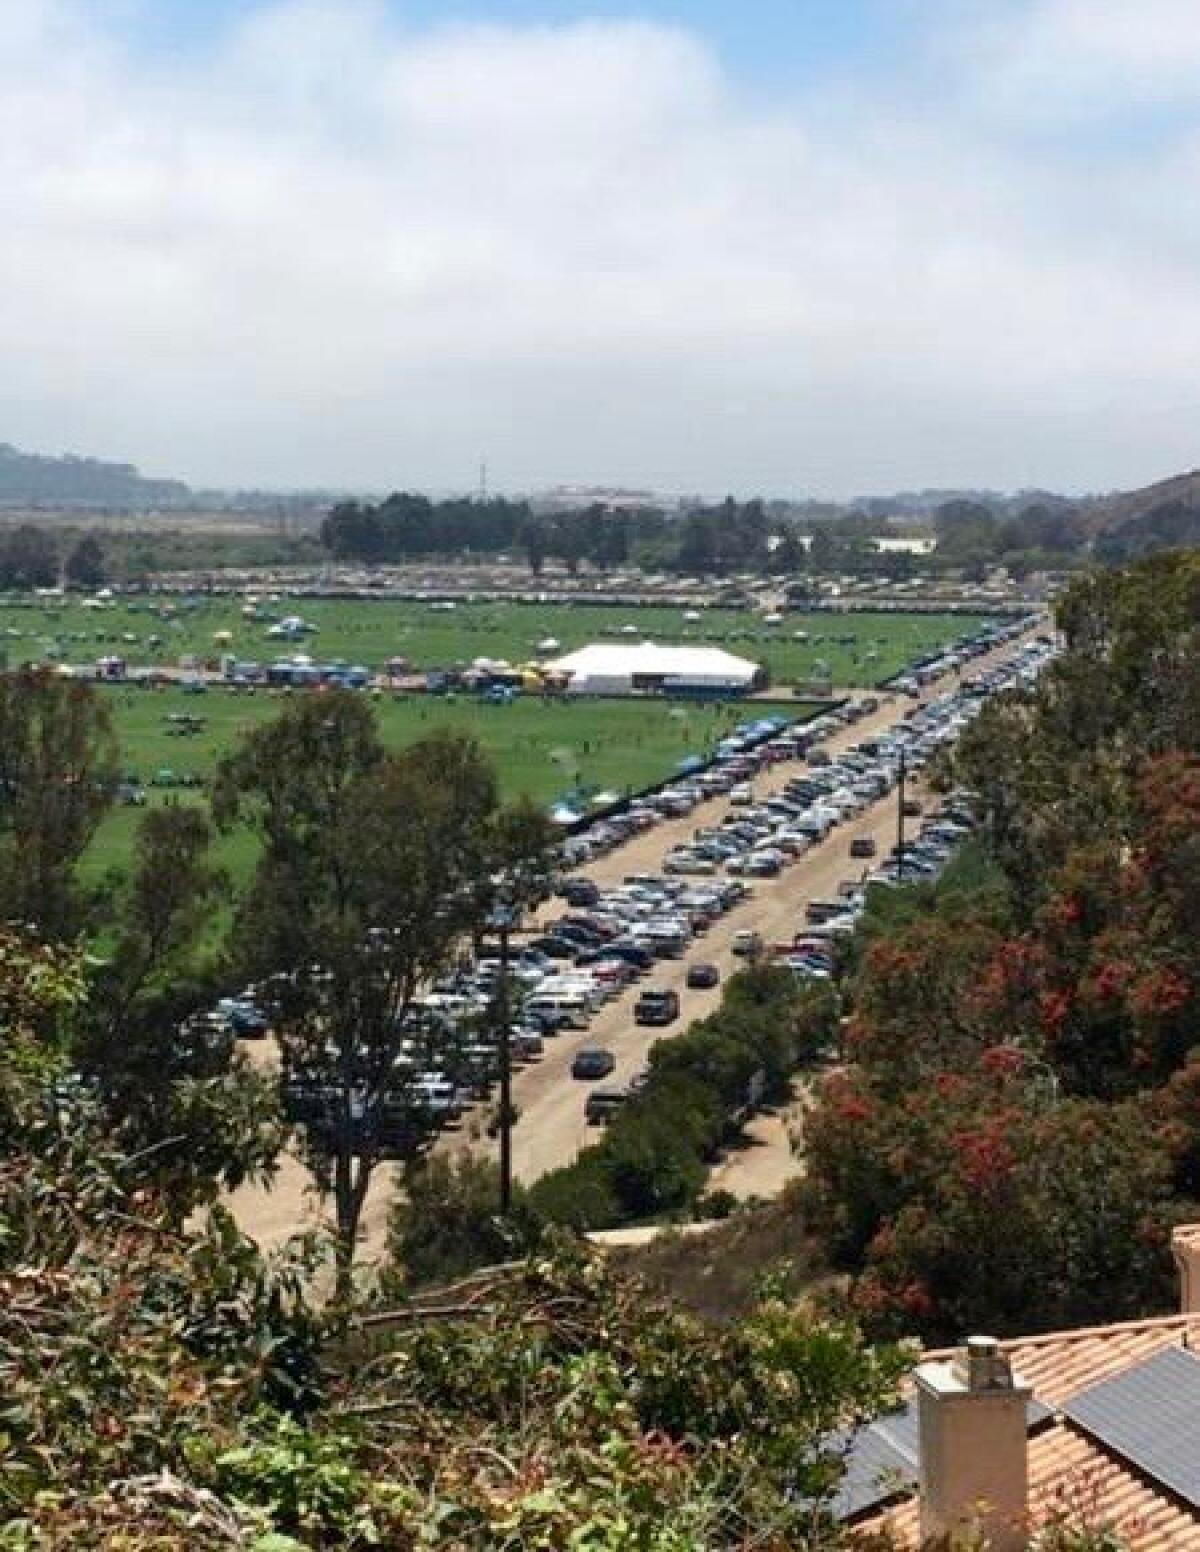 Neighbors say use at Surf Cup Sports Park has intensified, city says its  tenant is in compliance - Rancho Santa Fe Review